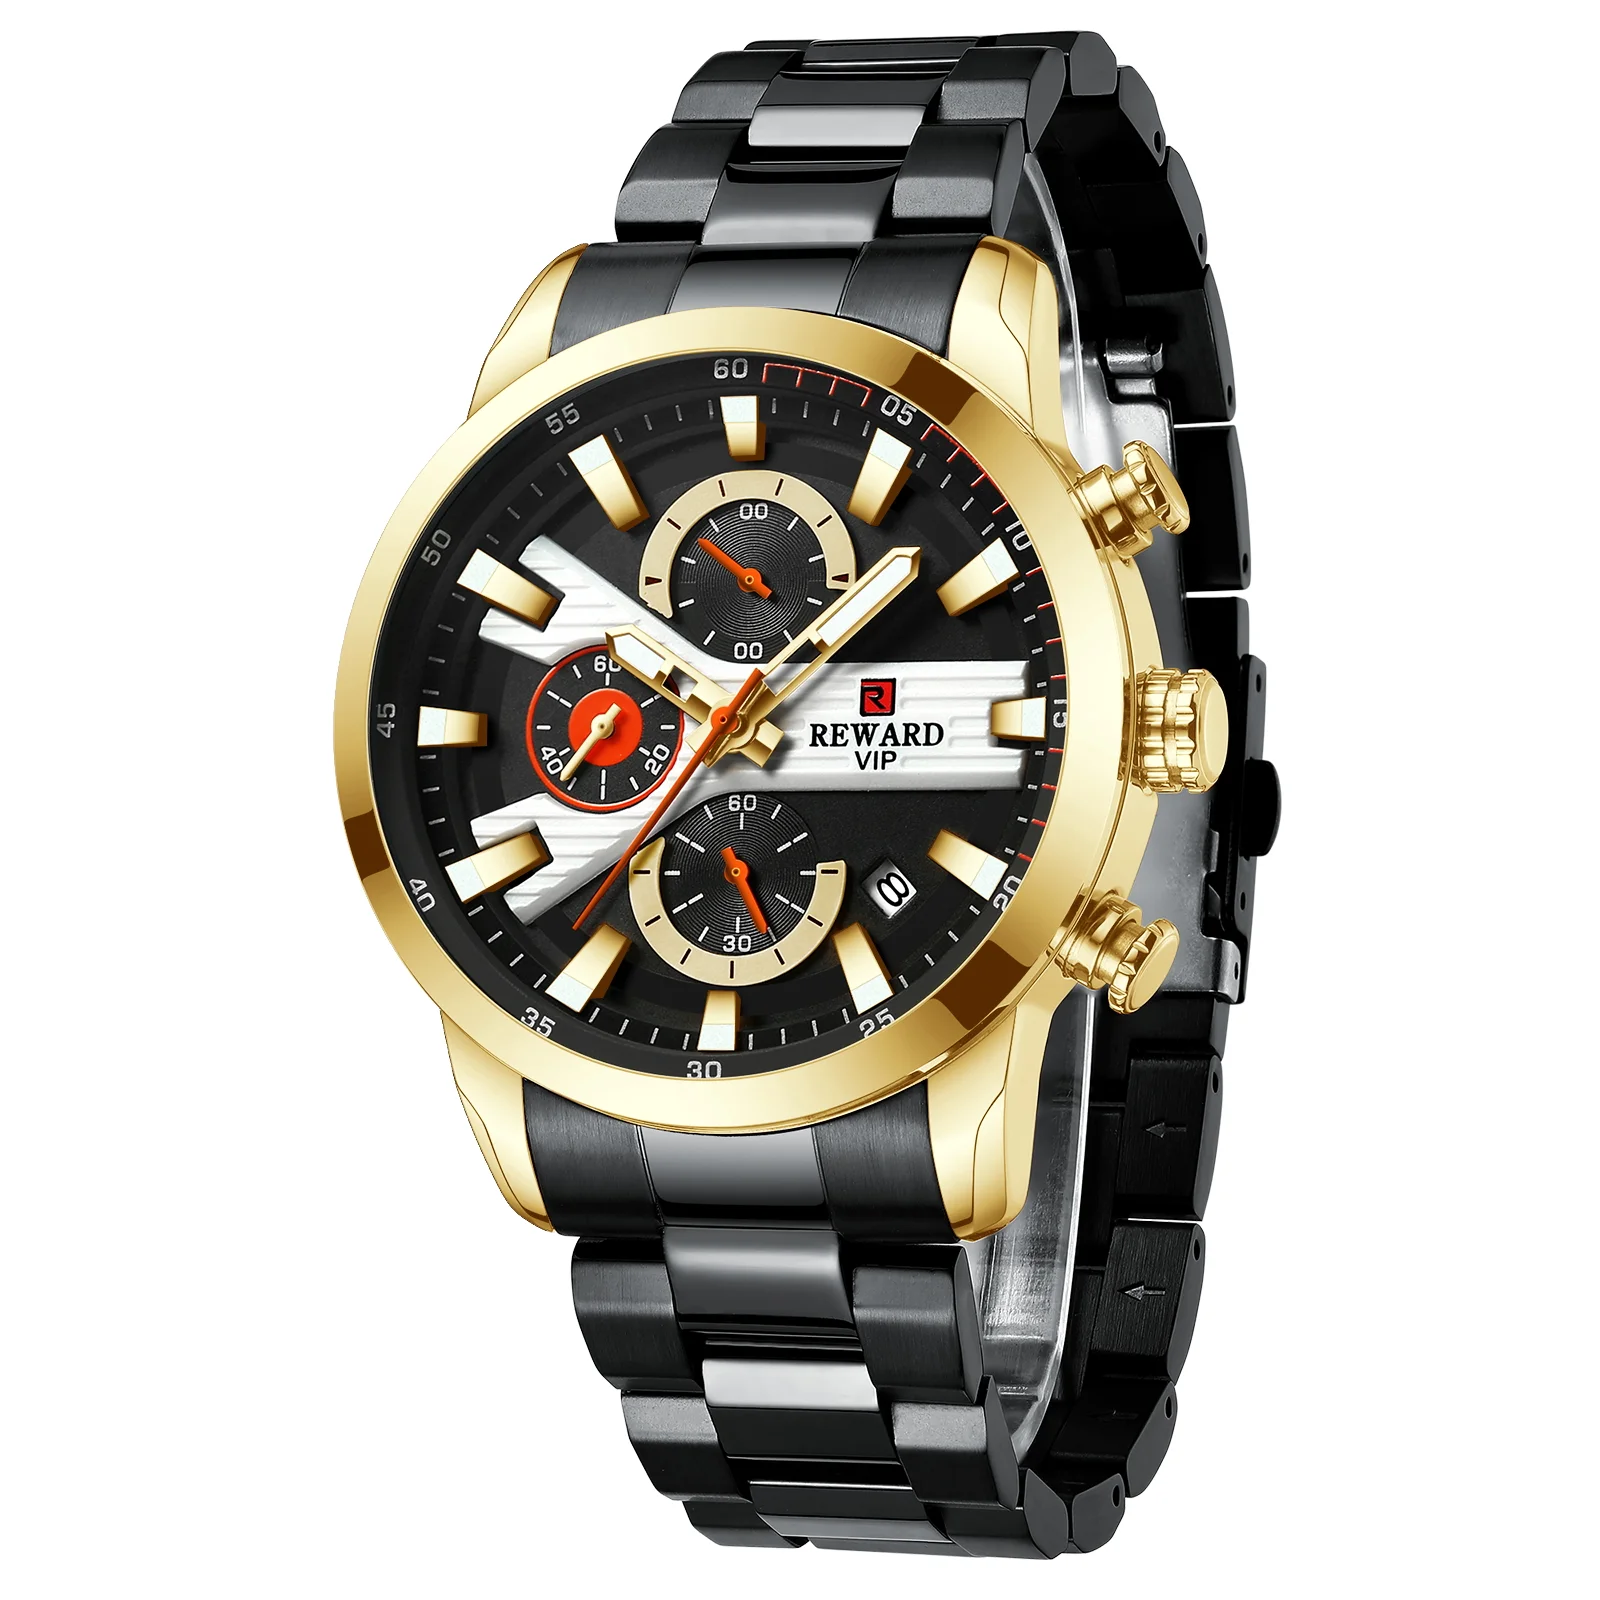 Reward Men Watch Luxury Wristwatch For Male Business Fashion Chronograph Watches Solid Stainless Steel Strap Mens Watches RD81014M